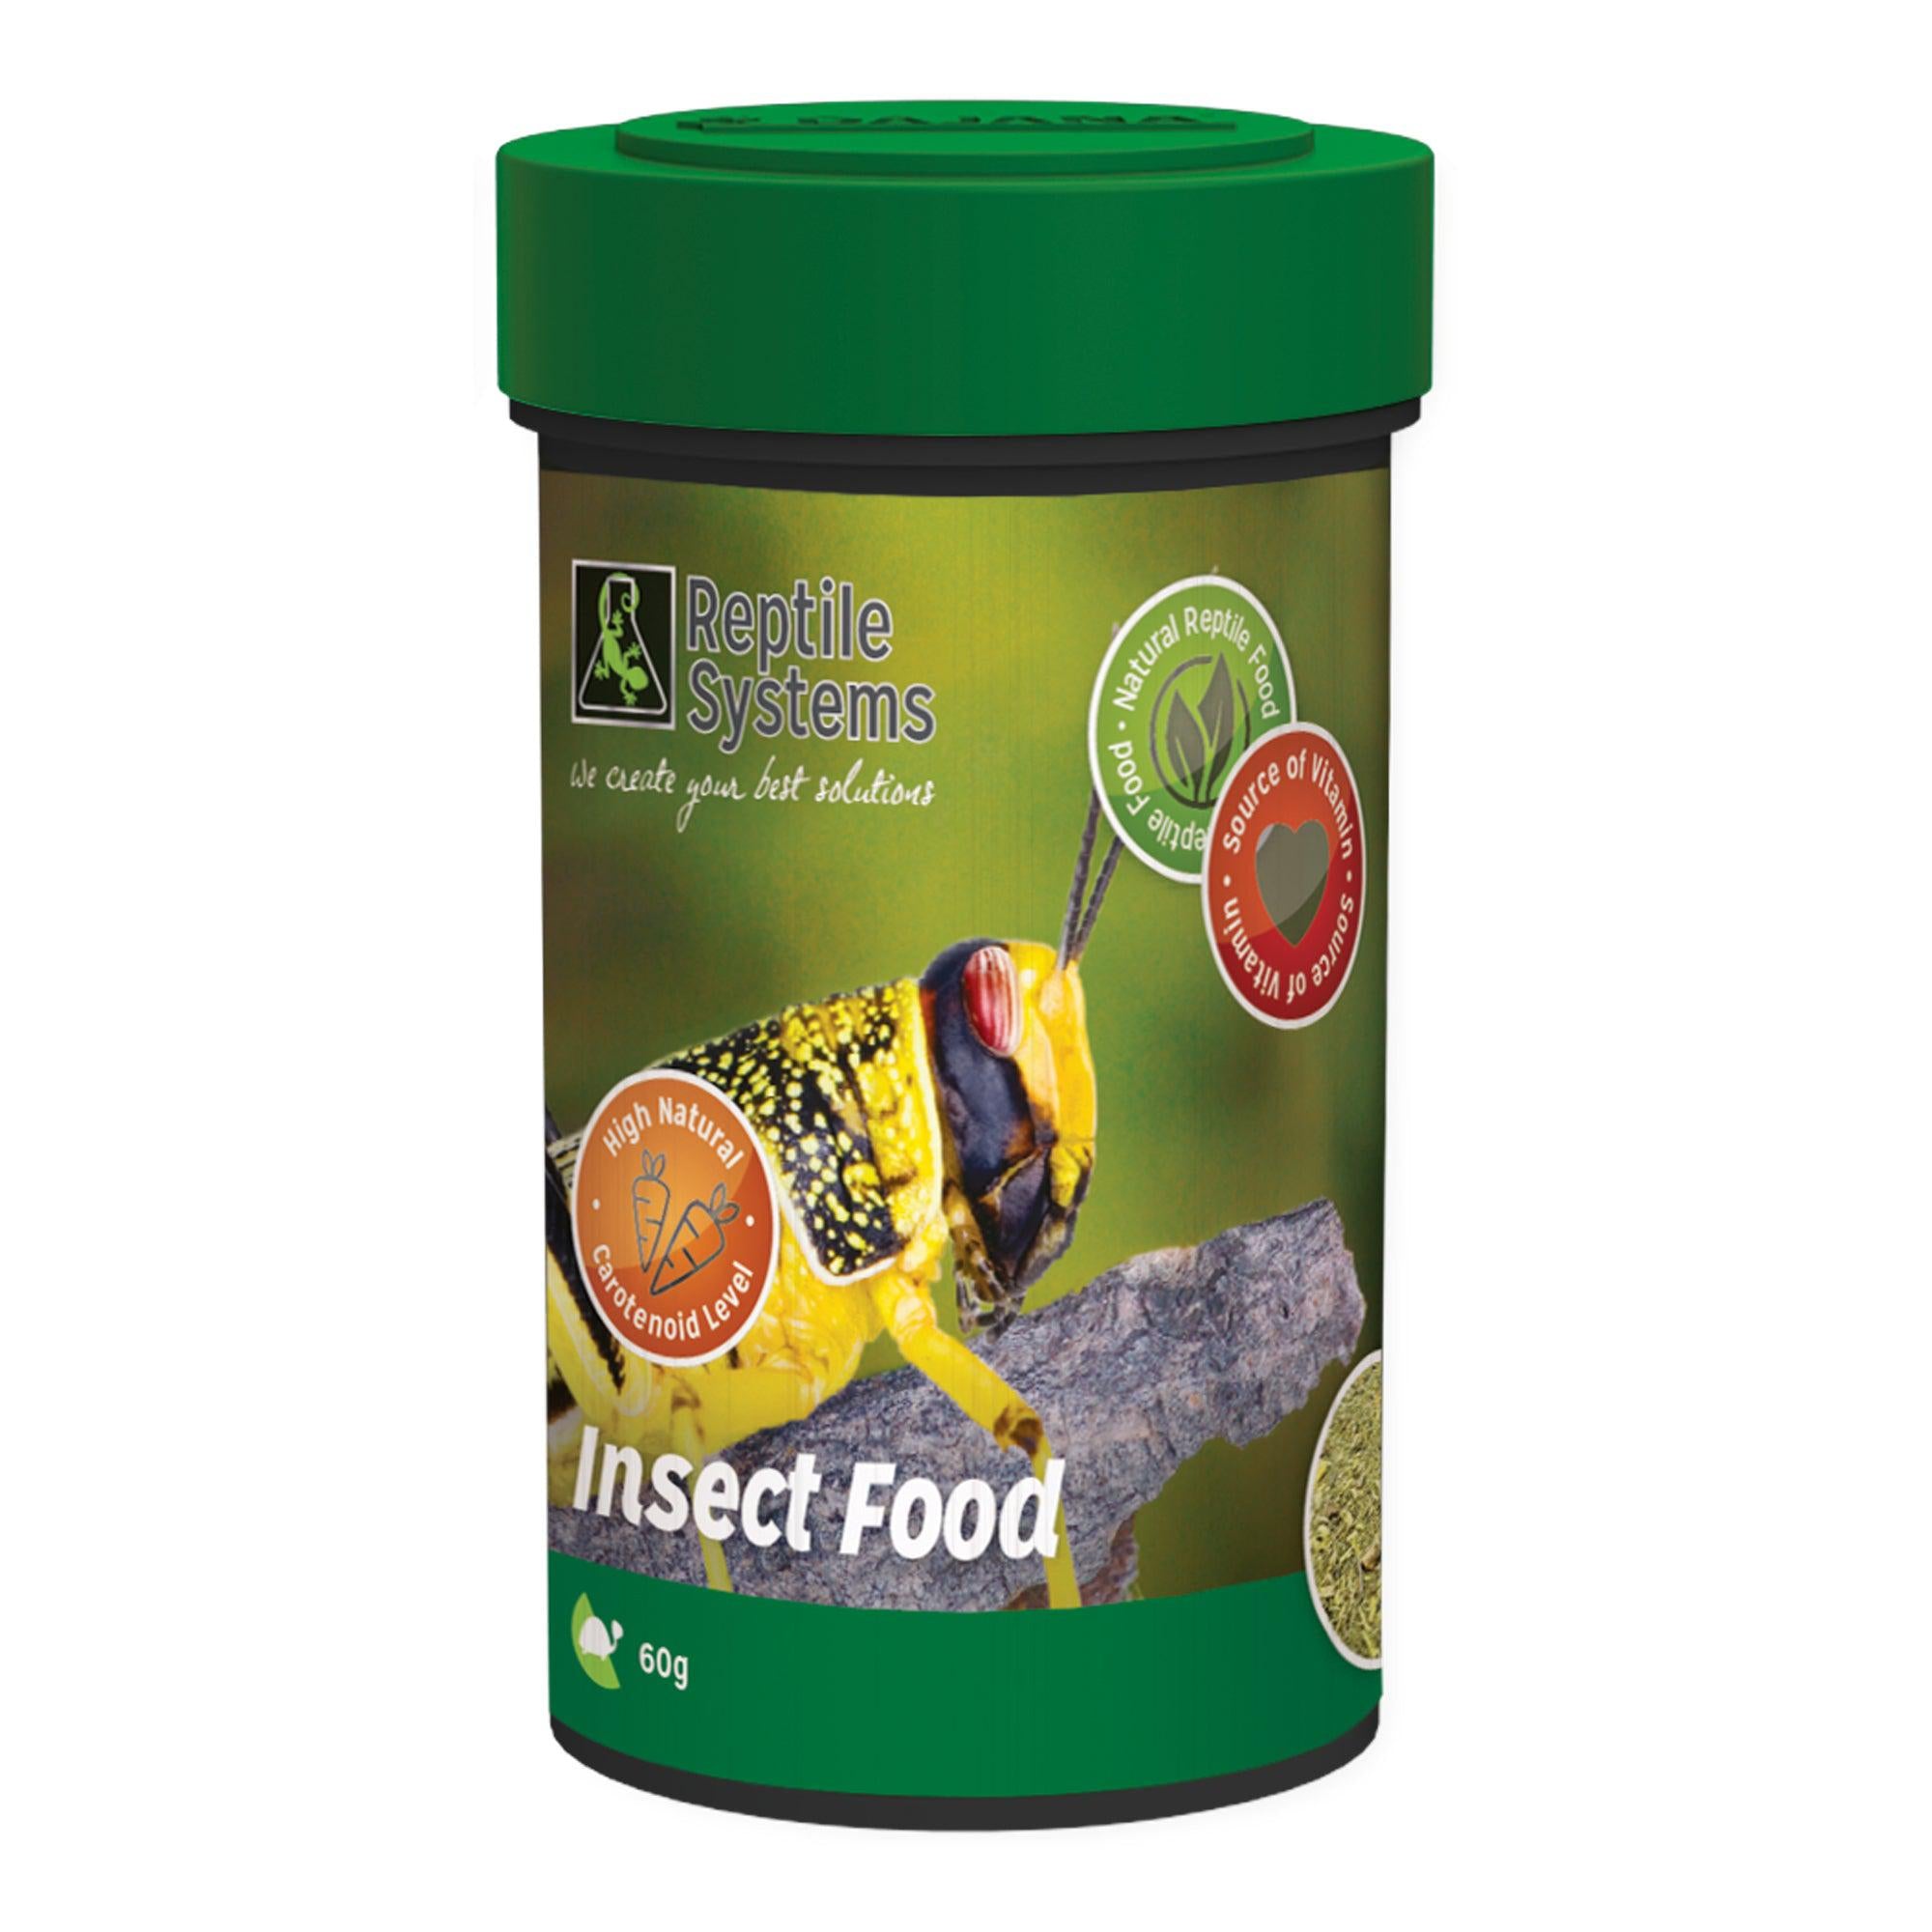 Reptile Systems Insect Food